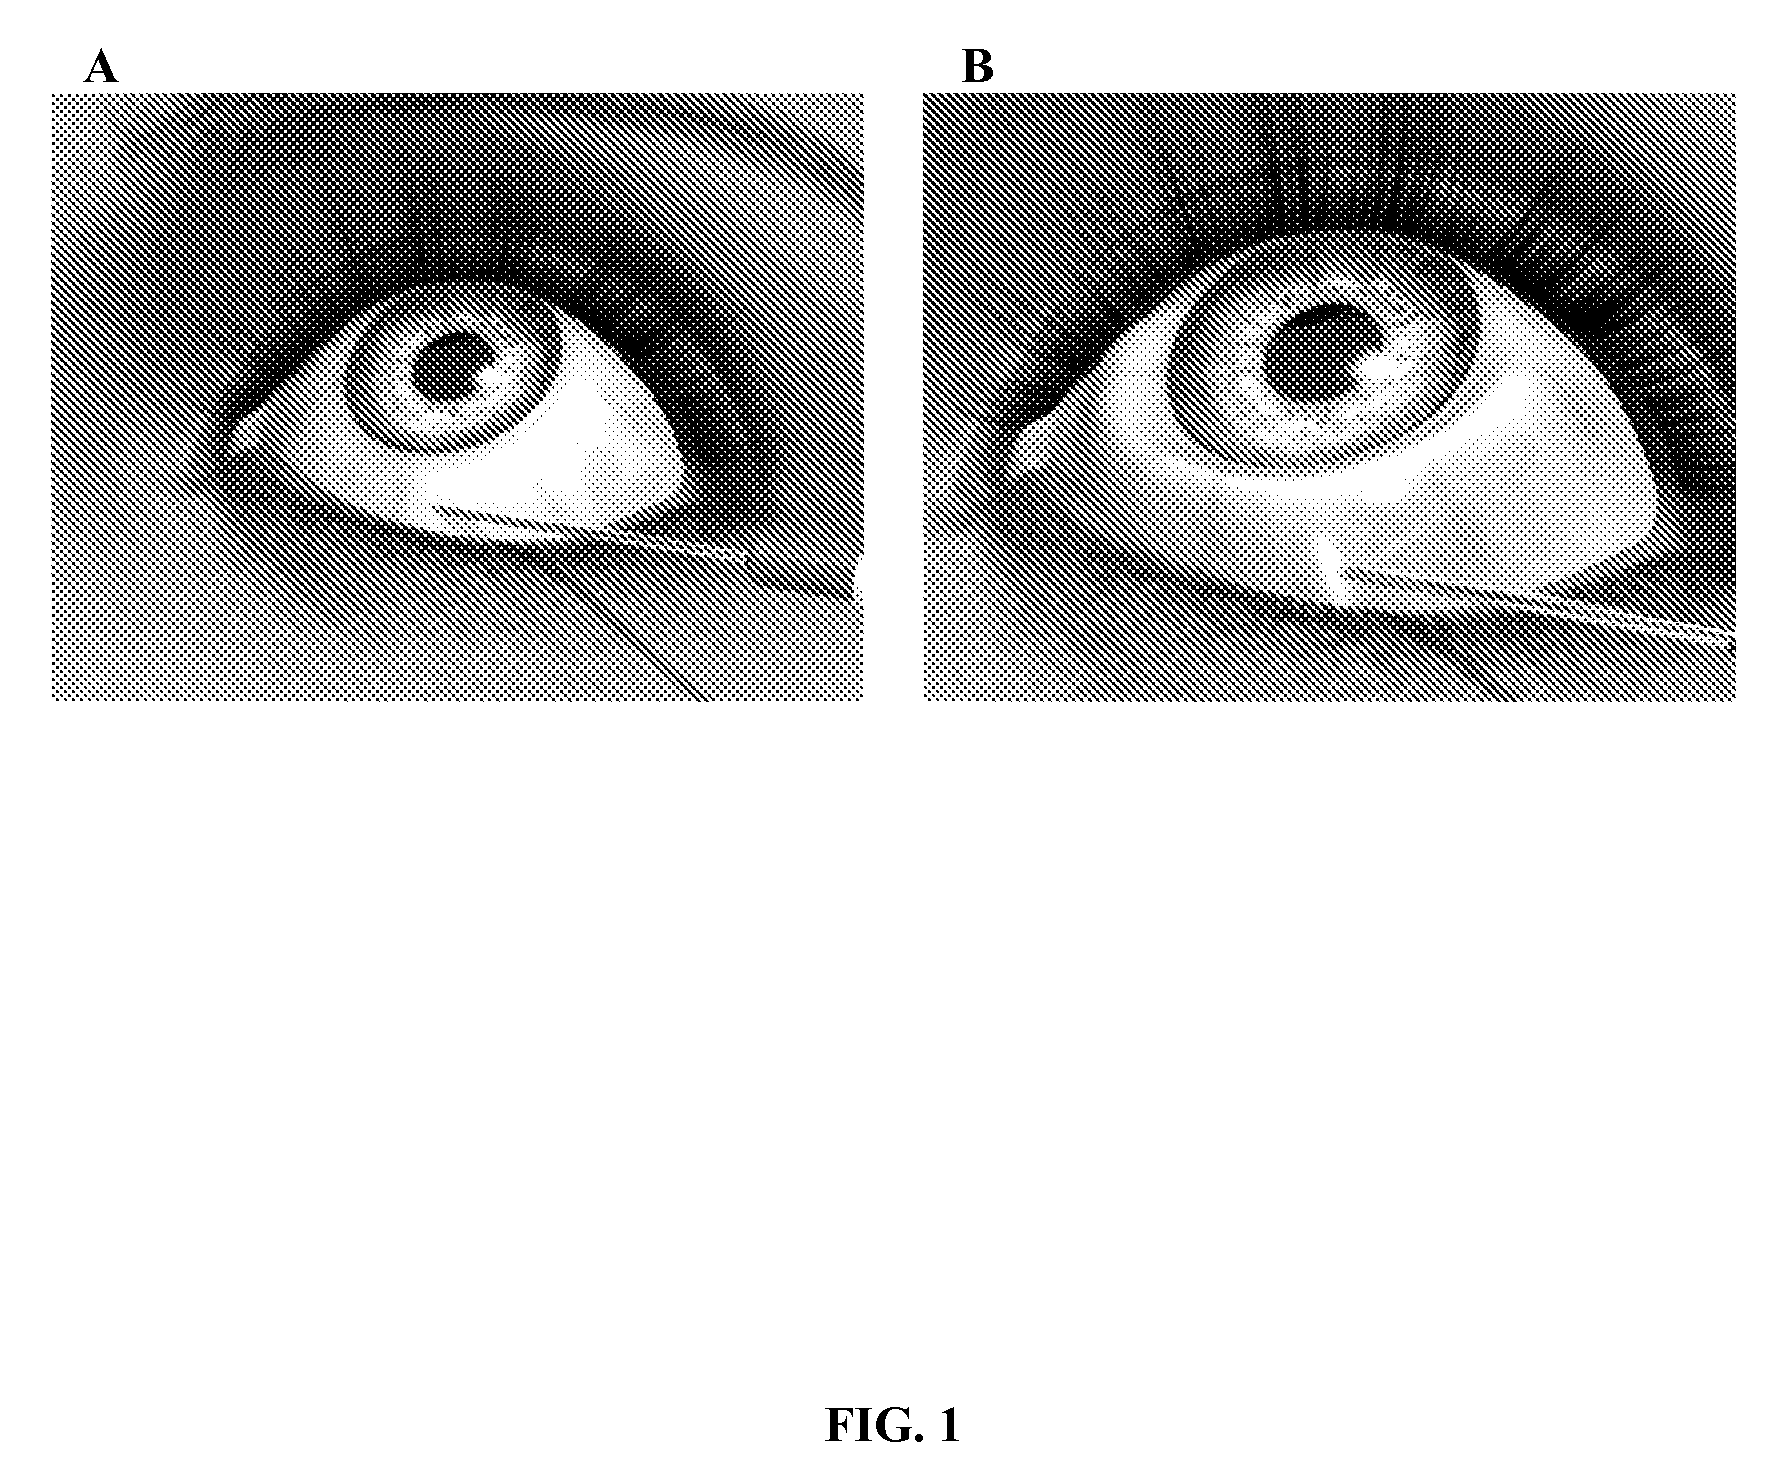 Method for Treating Primary and Secondary Forms of Glaucoma